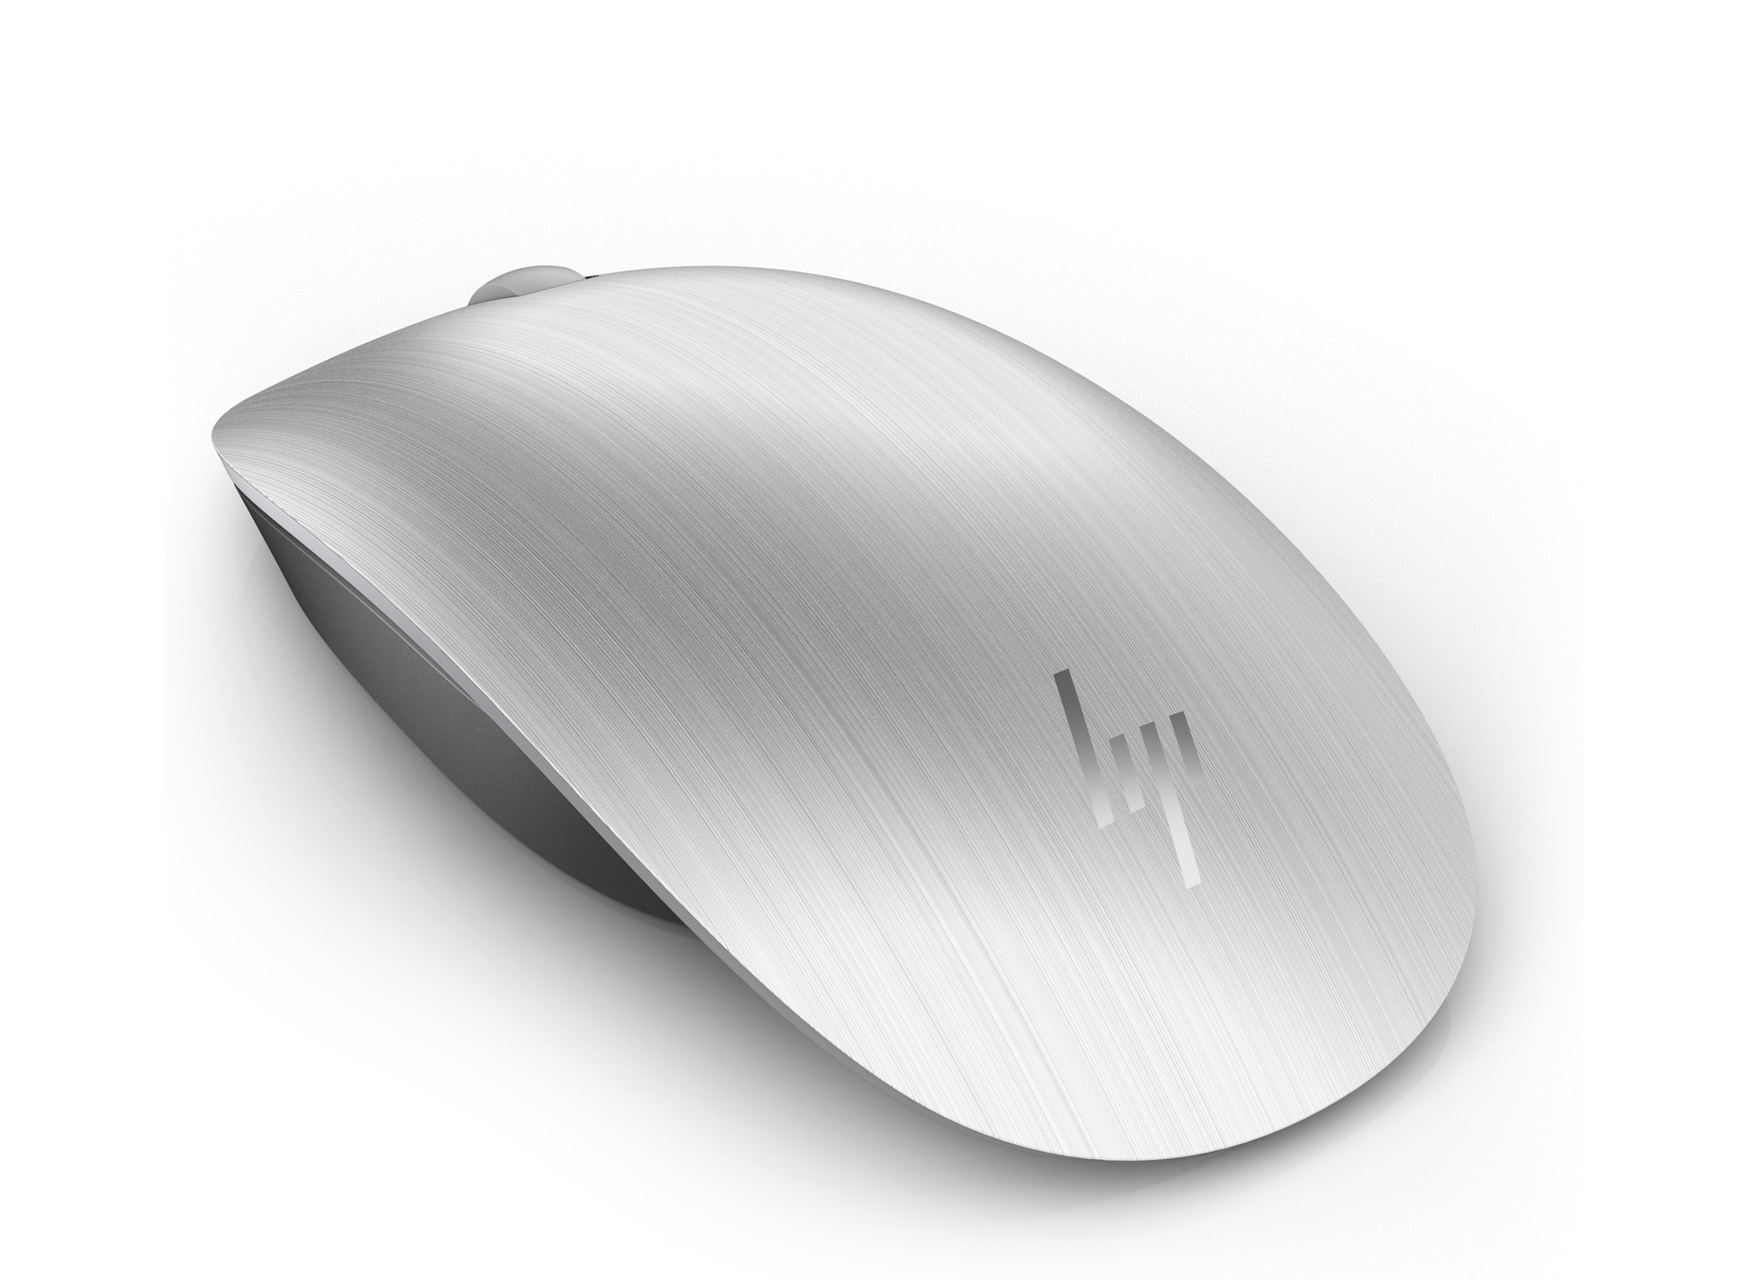 HP Spectre Bluetooth® Mouse 500 (Pike Silver) - HP Store UK